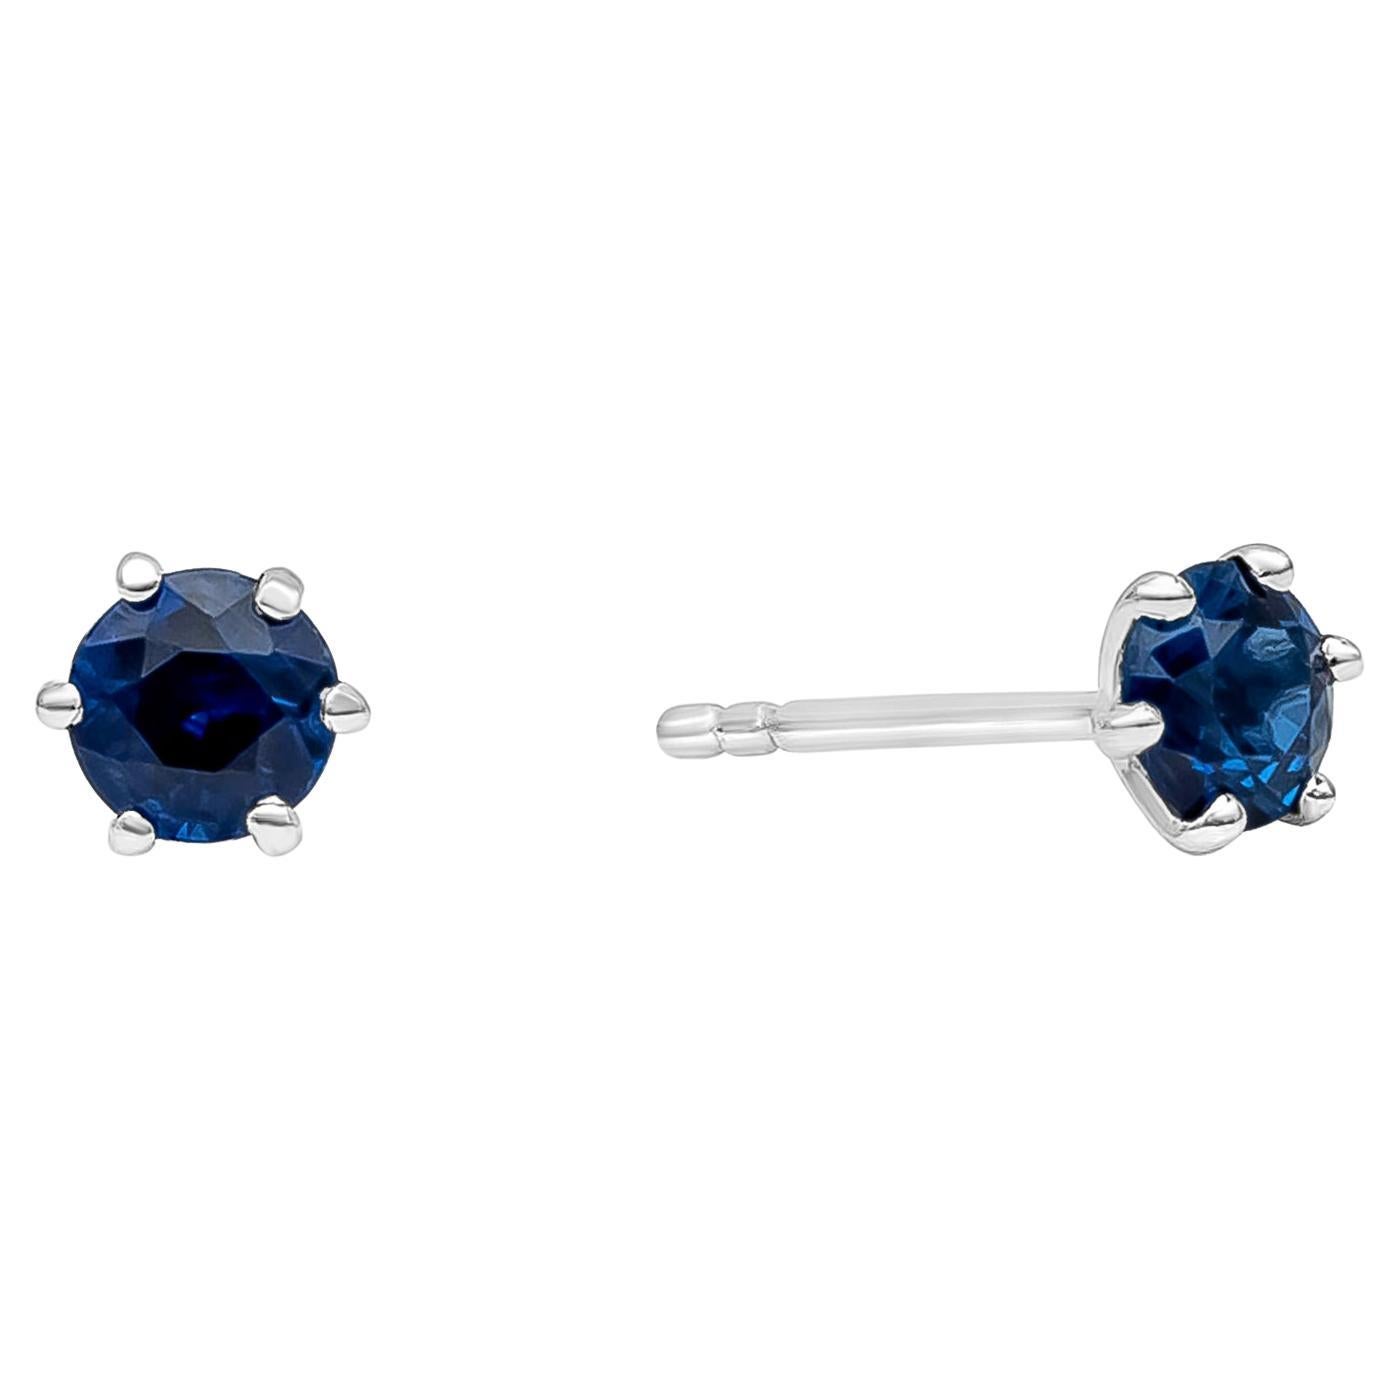 Roman Malakov 0.67 Carat Total Round Blue Sapphires Six-Prong Stud Earrings For Sale